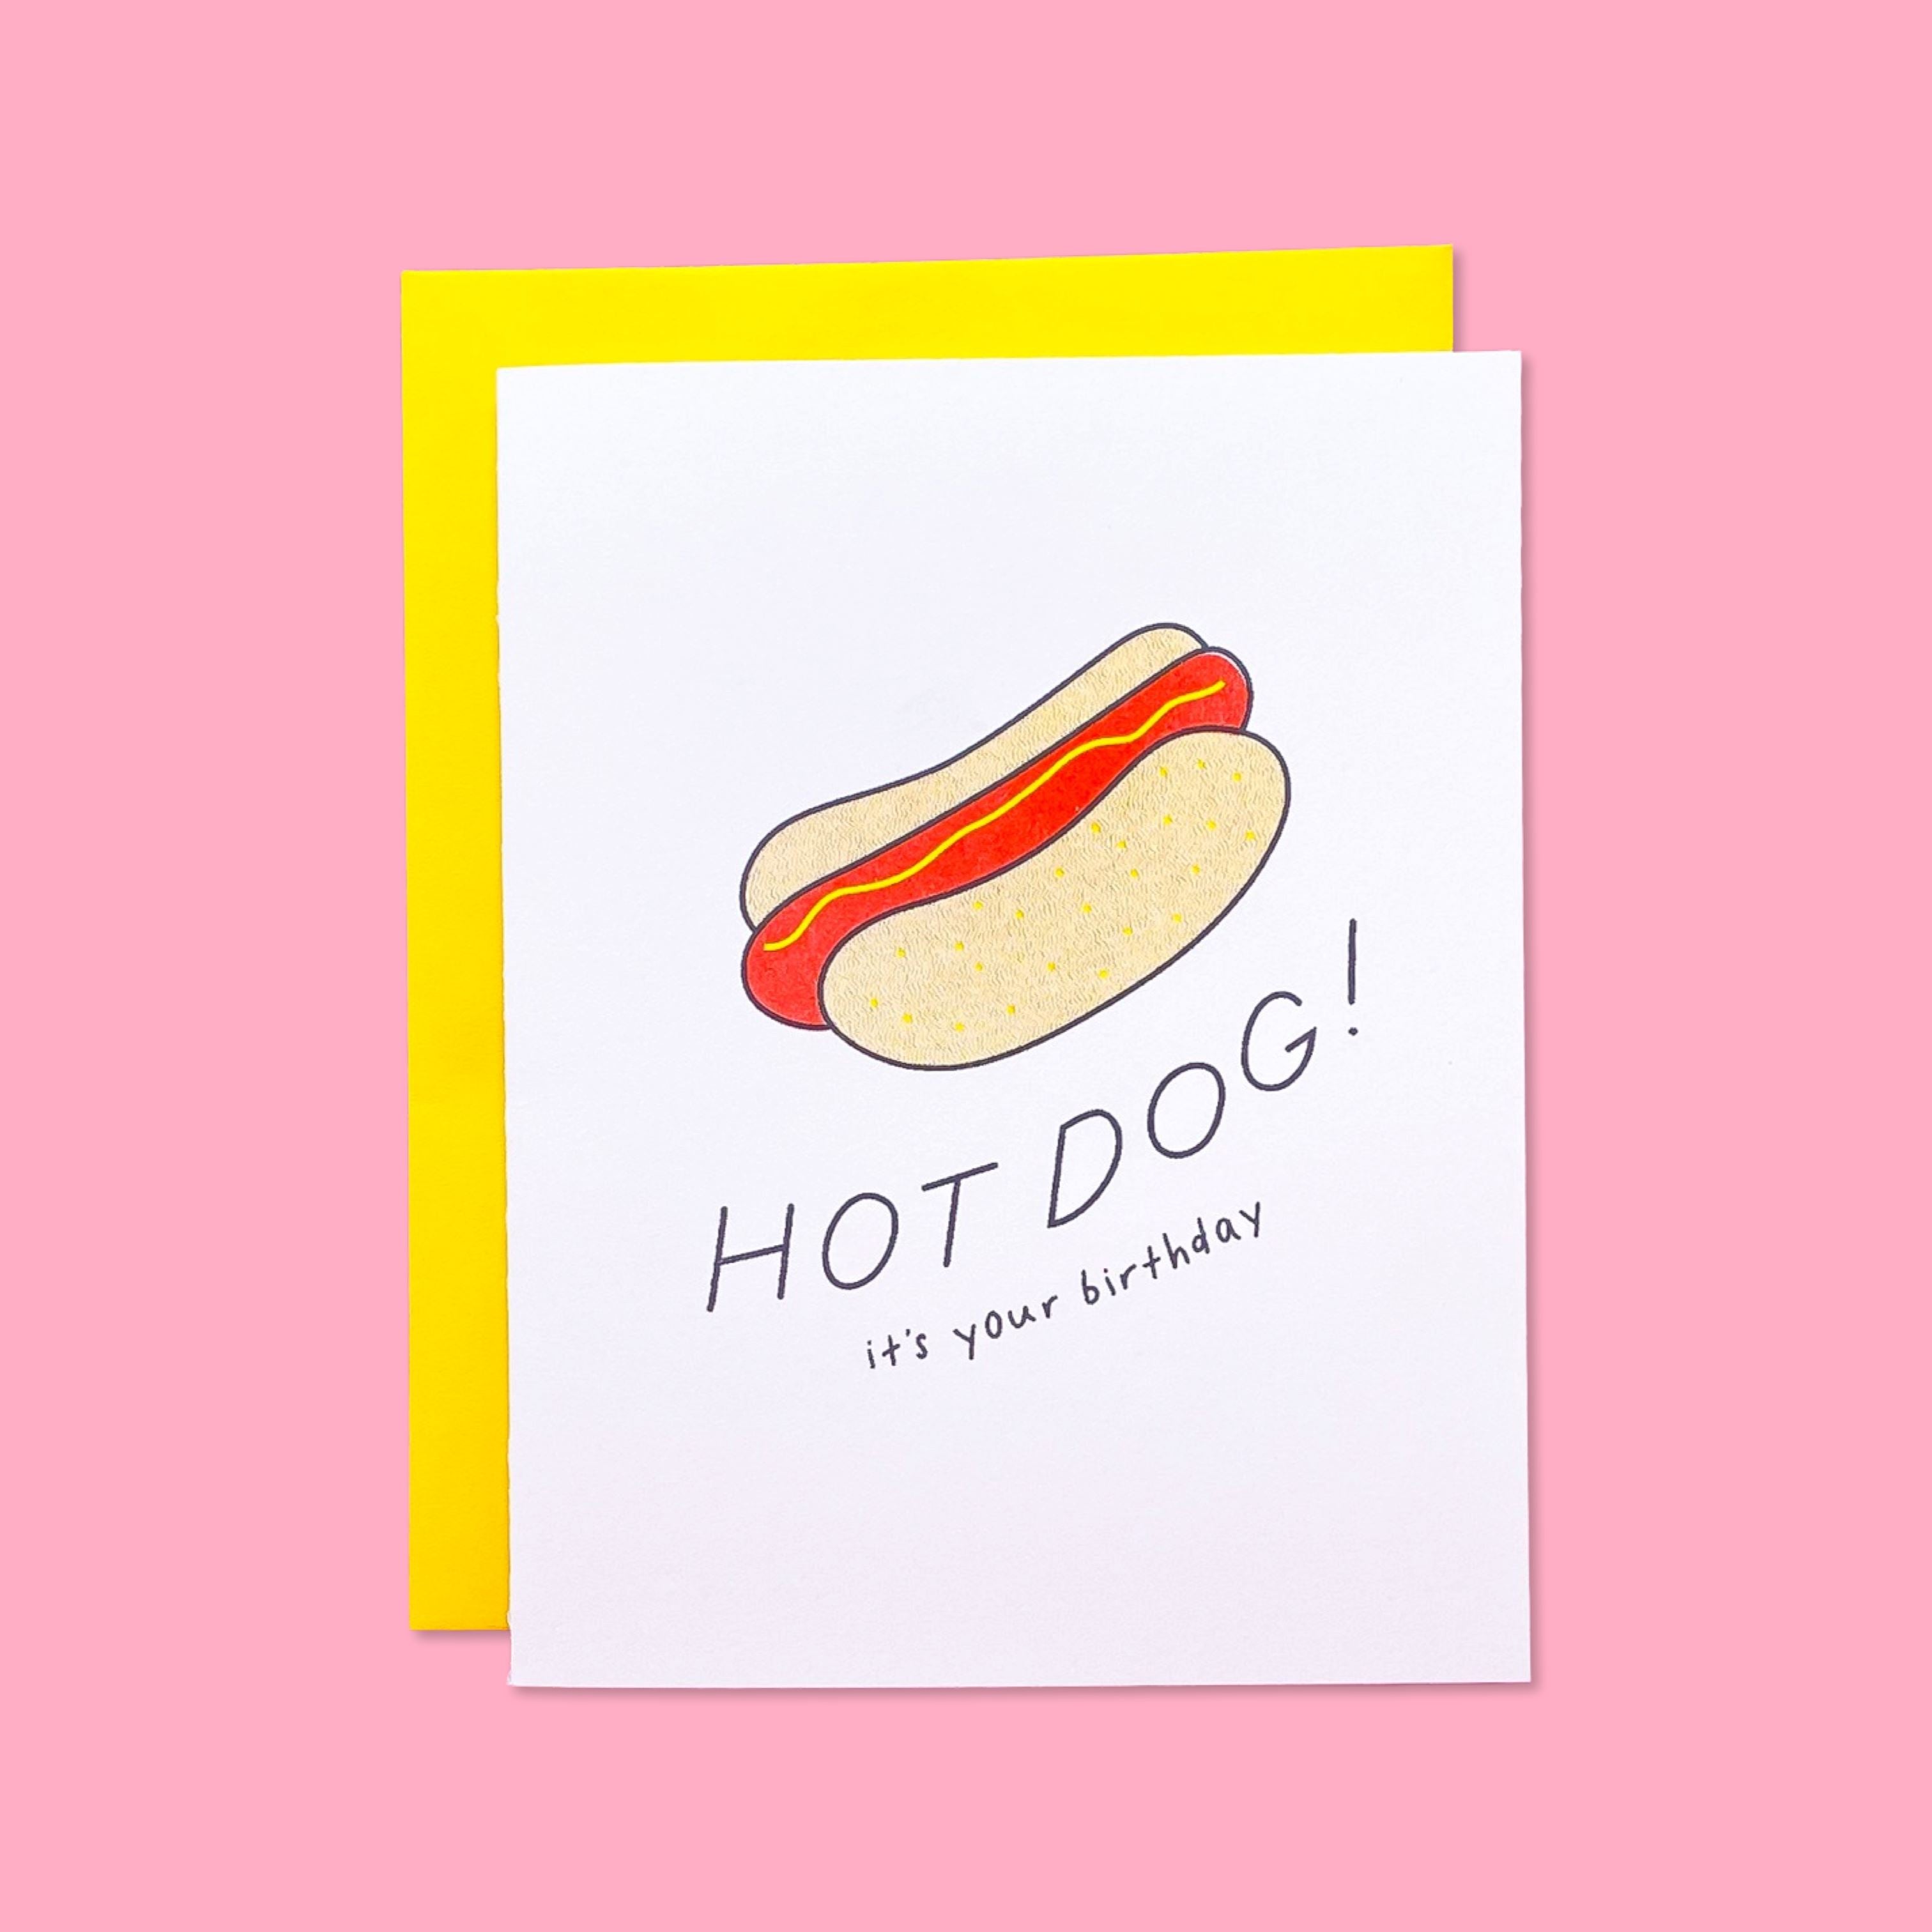 Hot Dog! It's Your Birthday Risograph Card